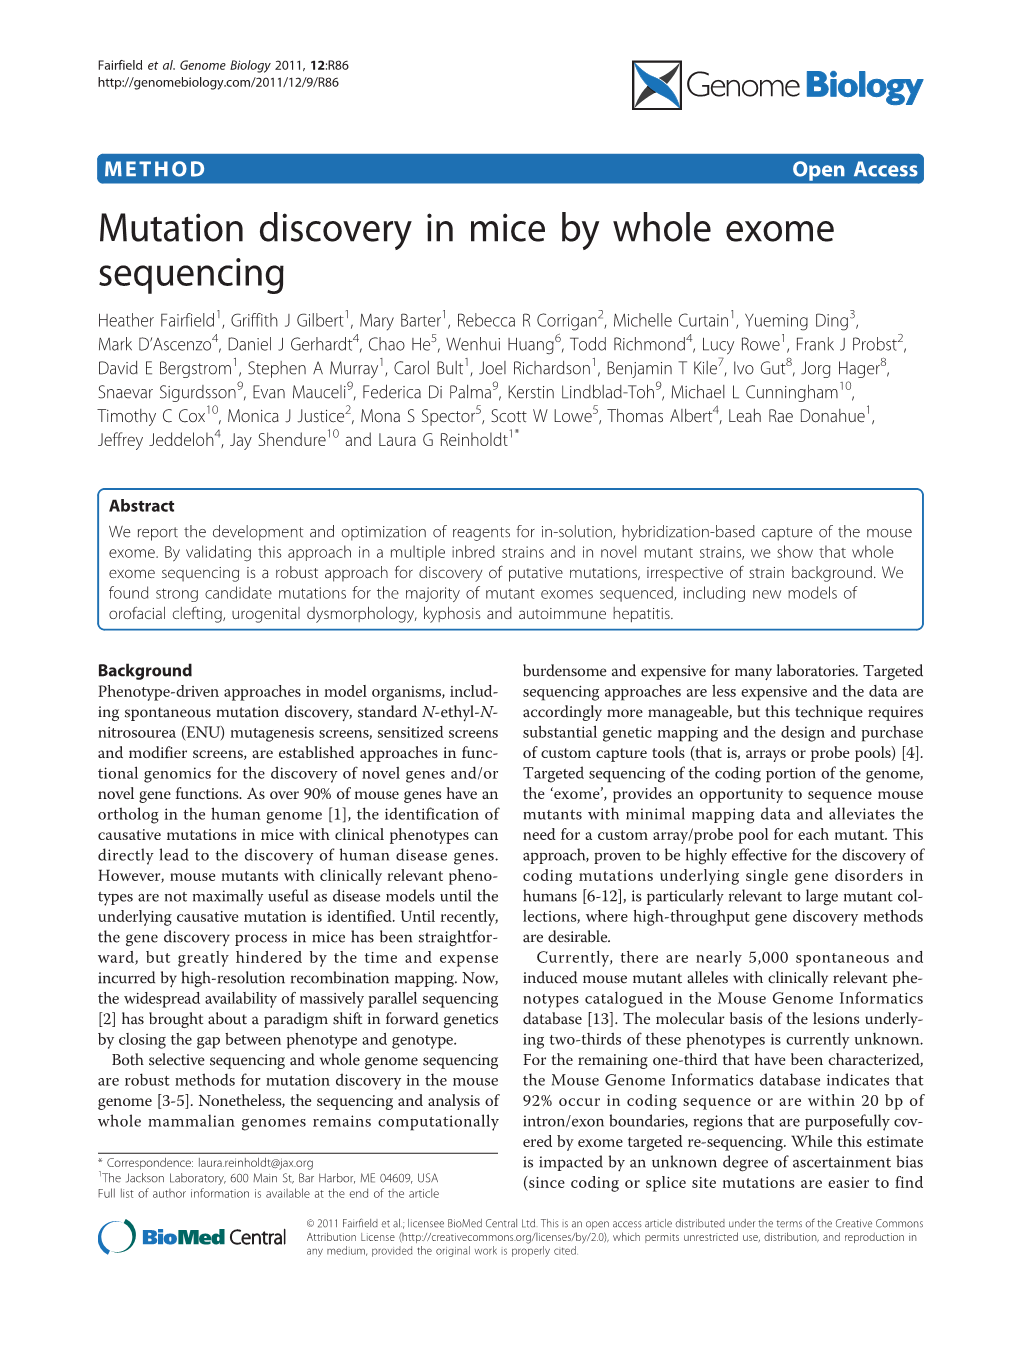 Mutation Discovery in Mice by Whole Exome Sequencing